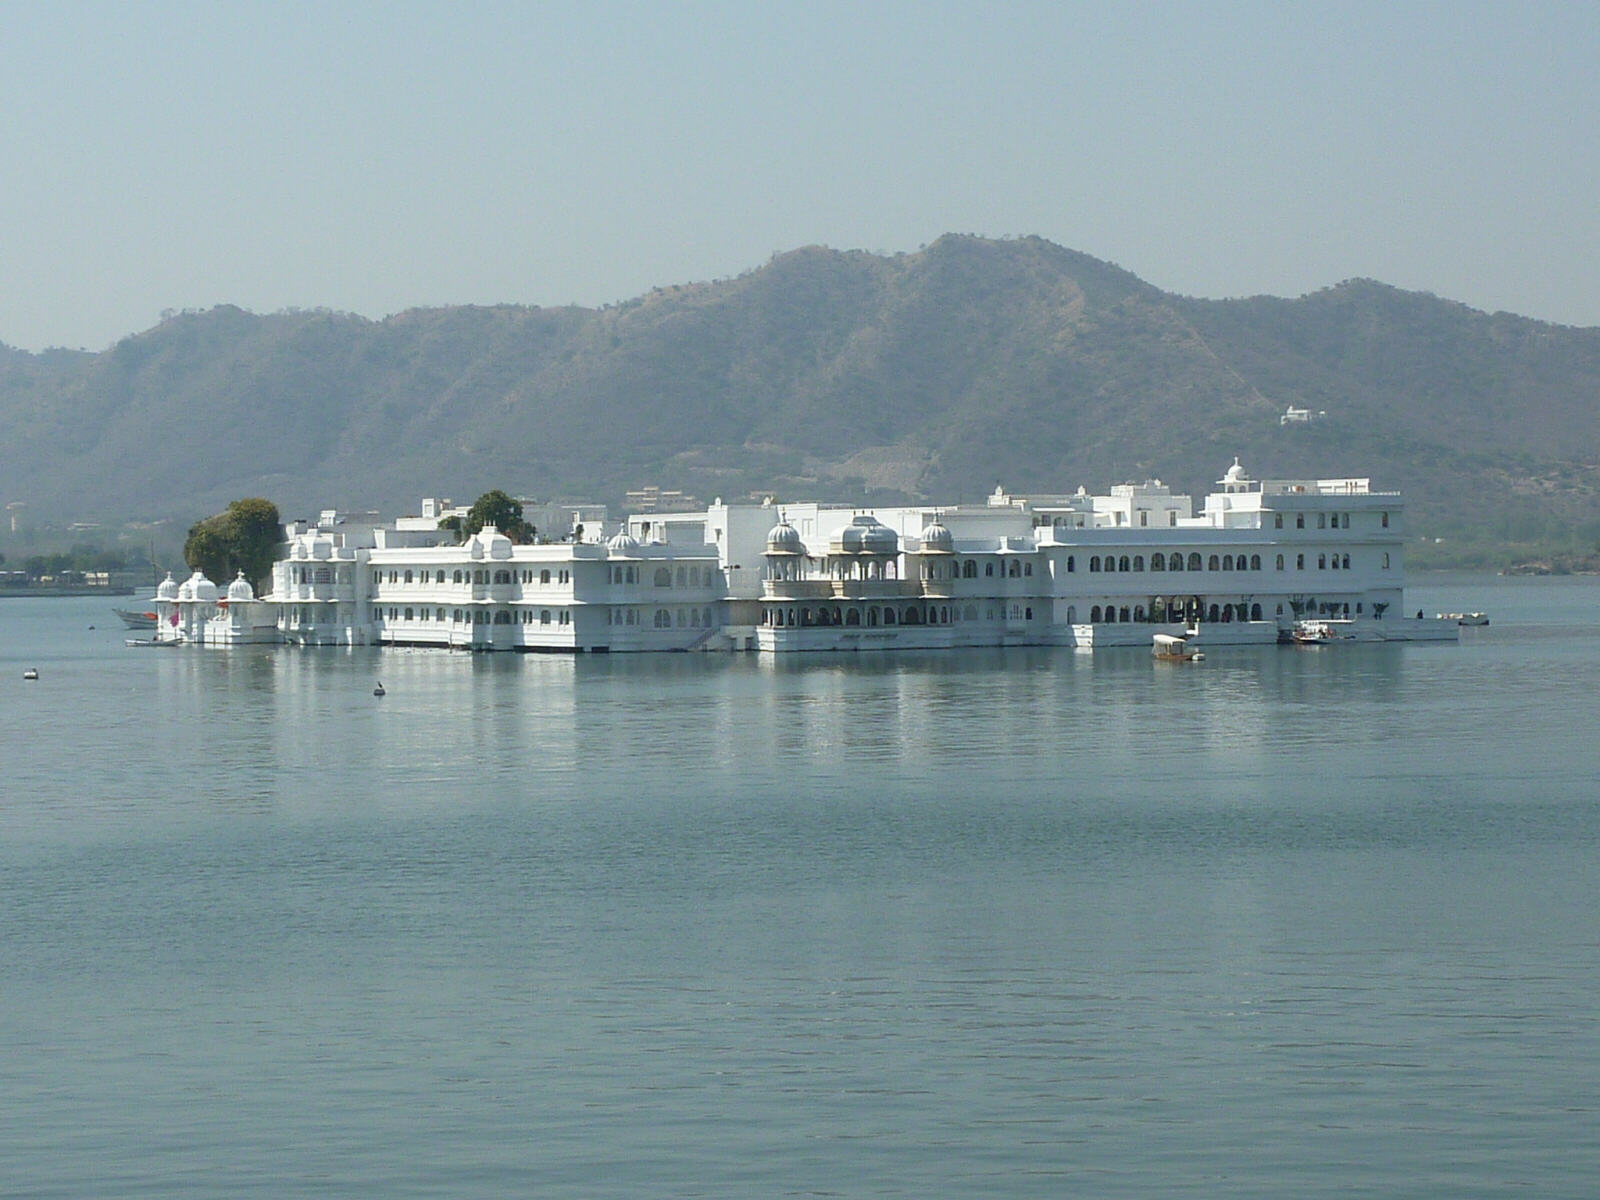 The Lake Palace in Udaipur, Rajasthan, India